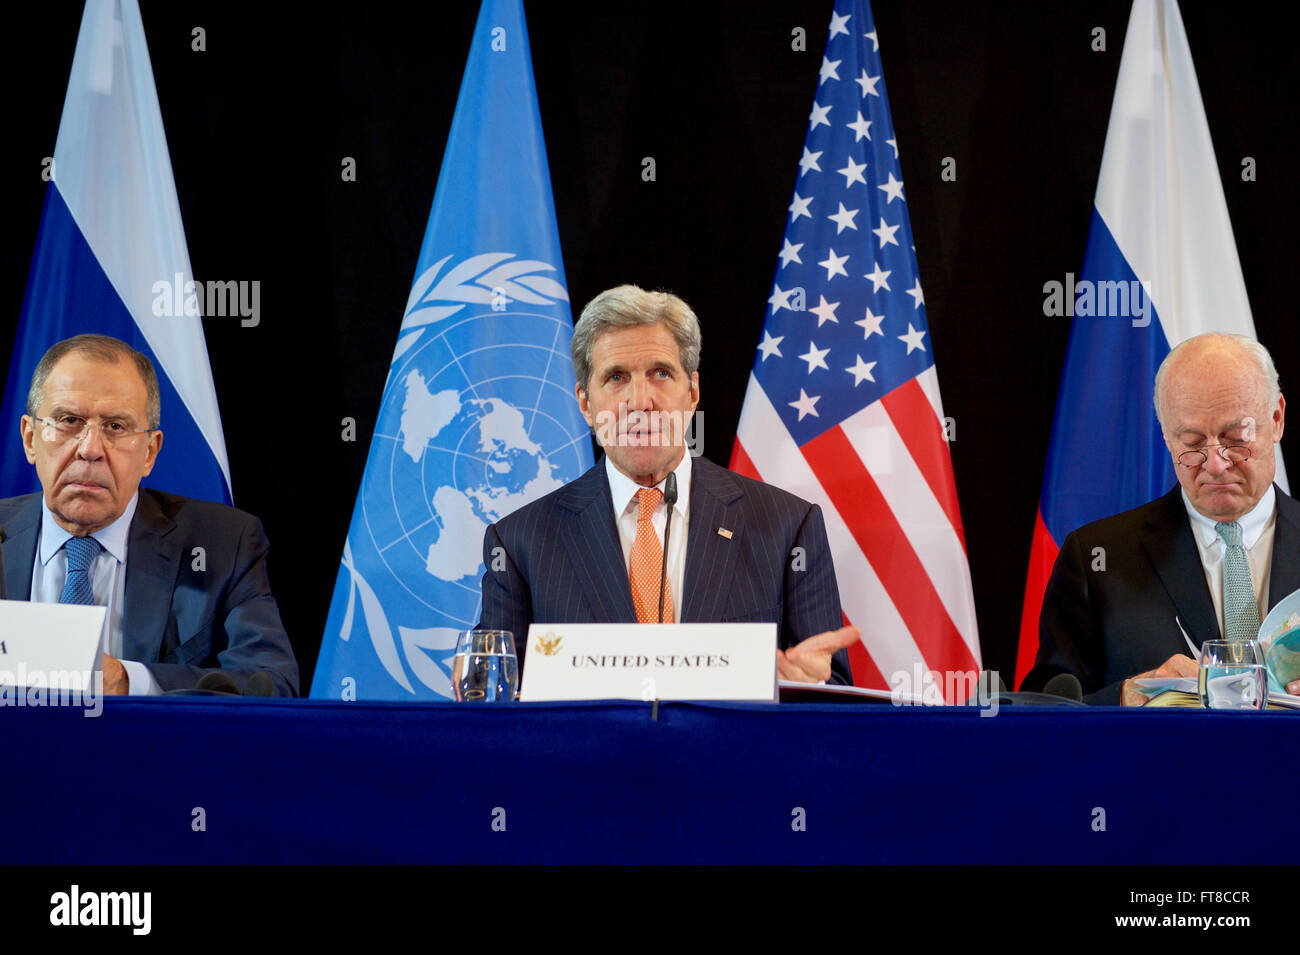 U.S. Secretary of State John Kerry, joined by Russian Foreign Minister Sergey Lavrov and United Nations Special Envoy for Syria Staffan de Mistura, addresses the media on February 12, 2016, at the Hilton Hotel join Munich, Germany, following a meeting of the International Syria Support Group. [State Department photo/ Public Domain] Stock Photo